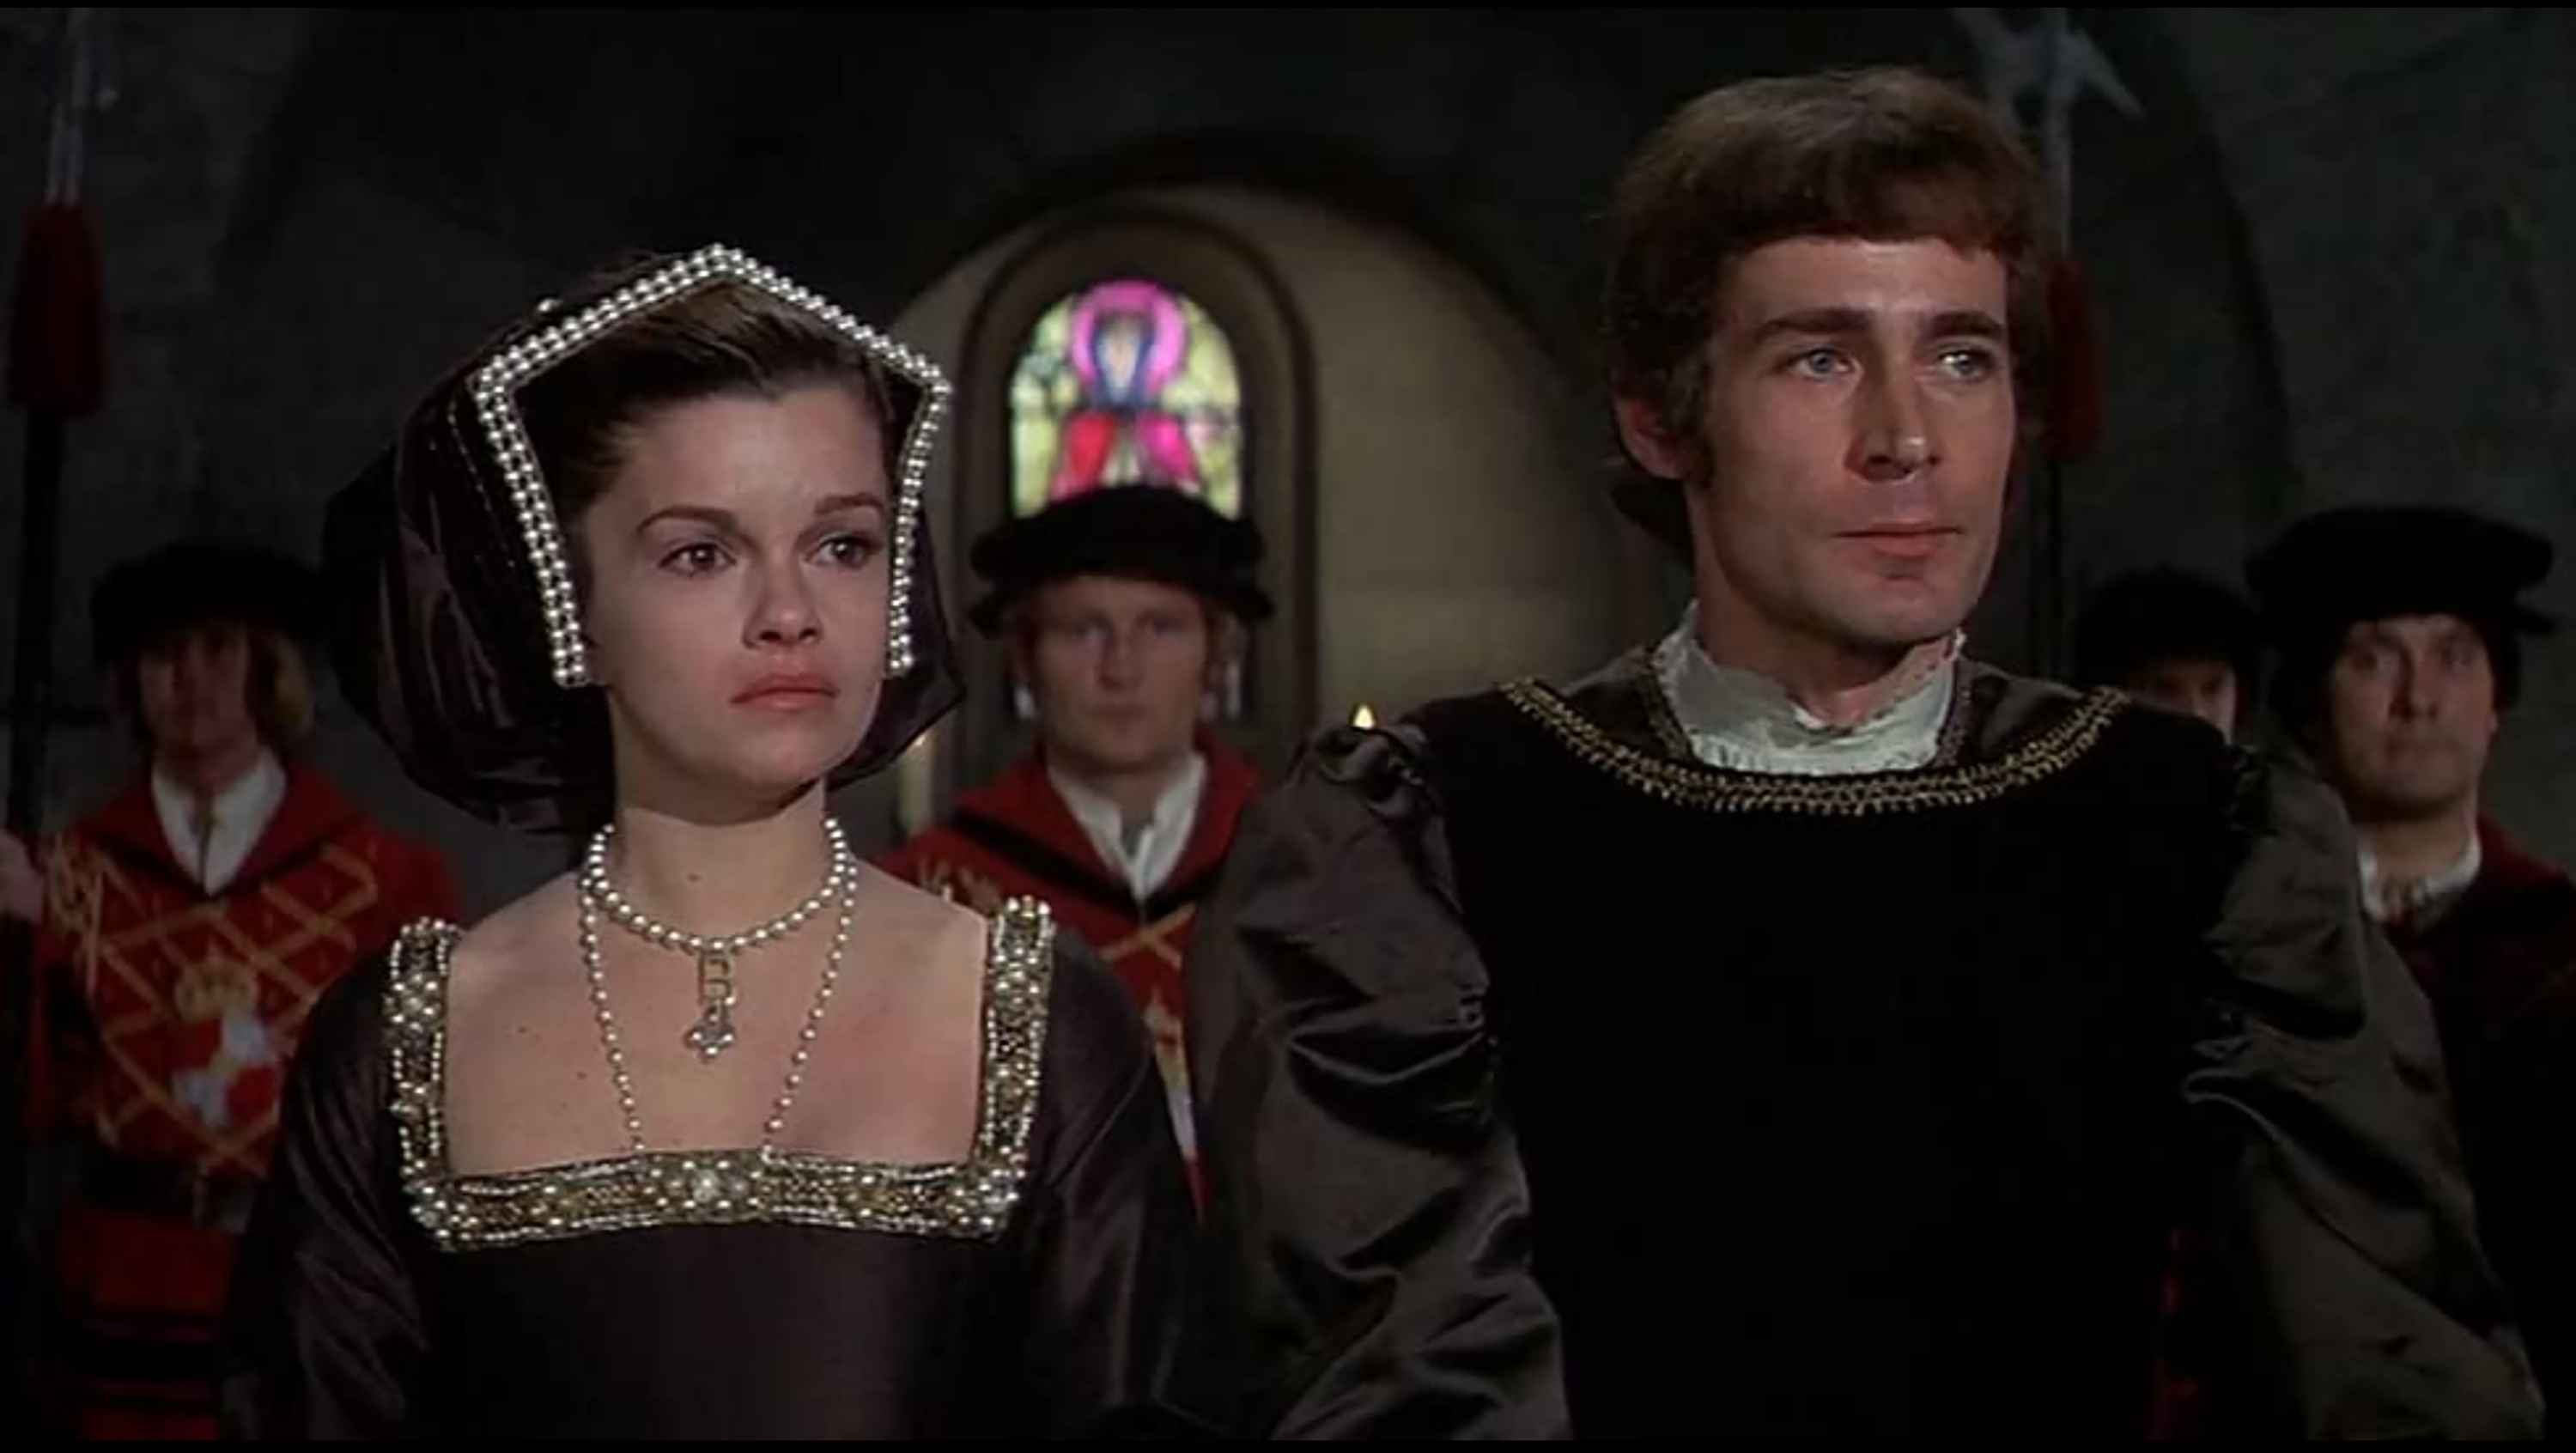 Geneviève Bujold and Michael Johnson in "Anne of the Thousand Days" (1969)